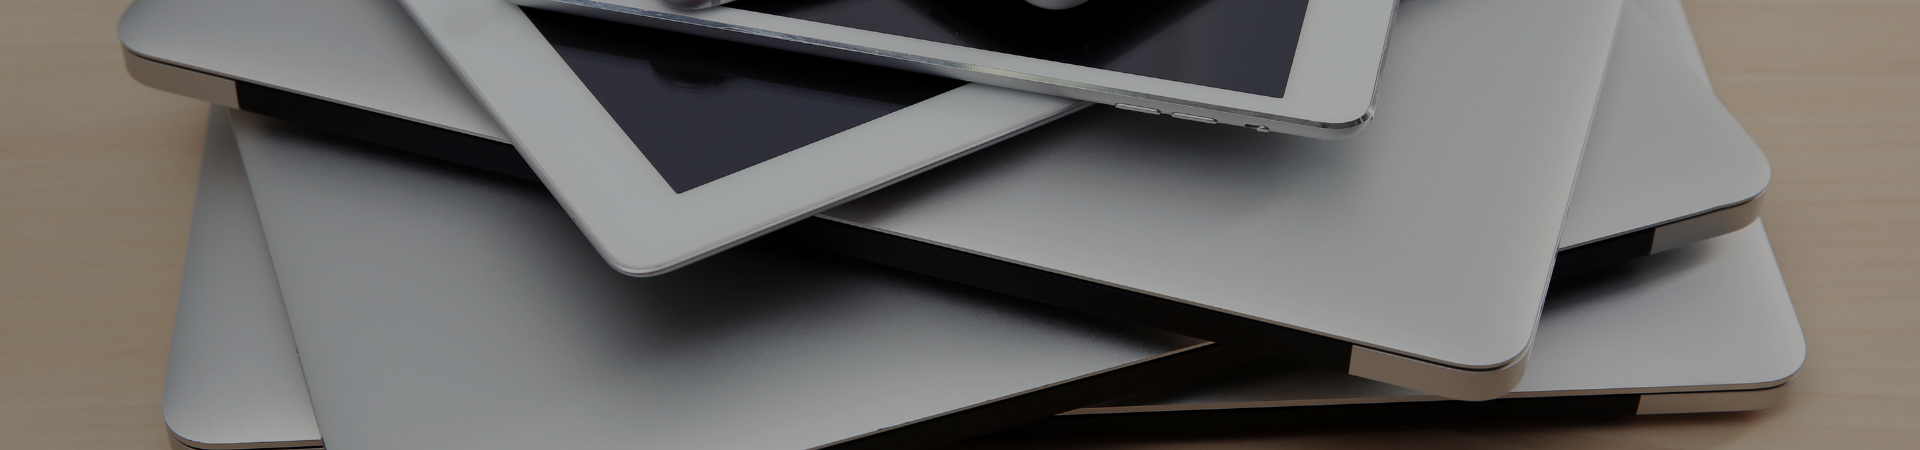 Page Header Image of laptops and tablet devices stacked on top of each other